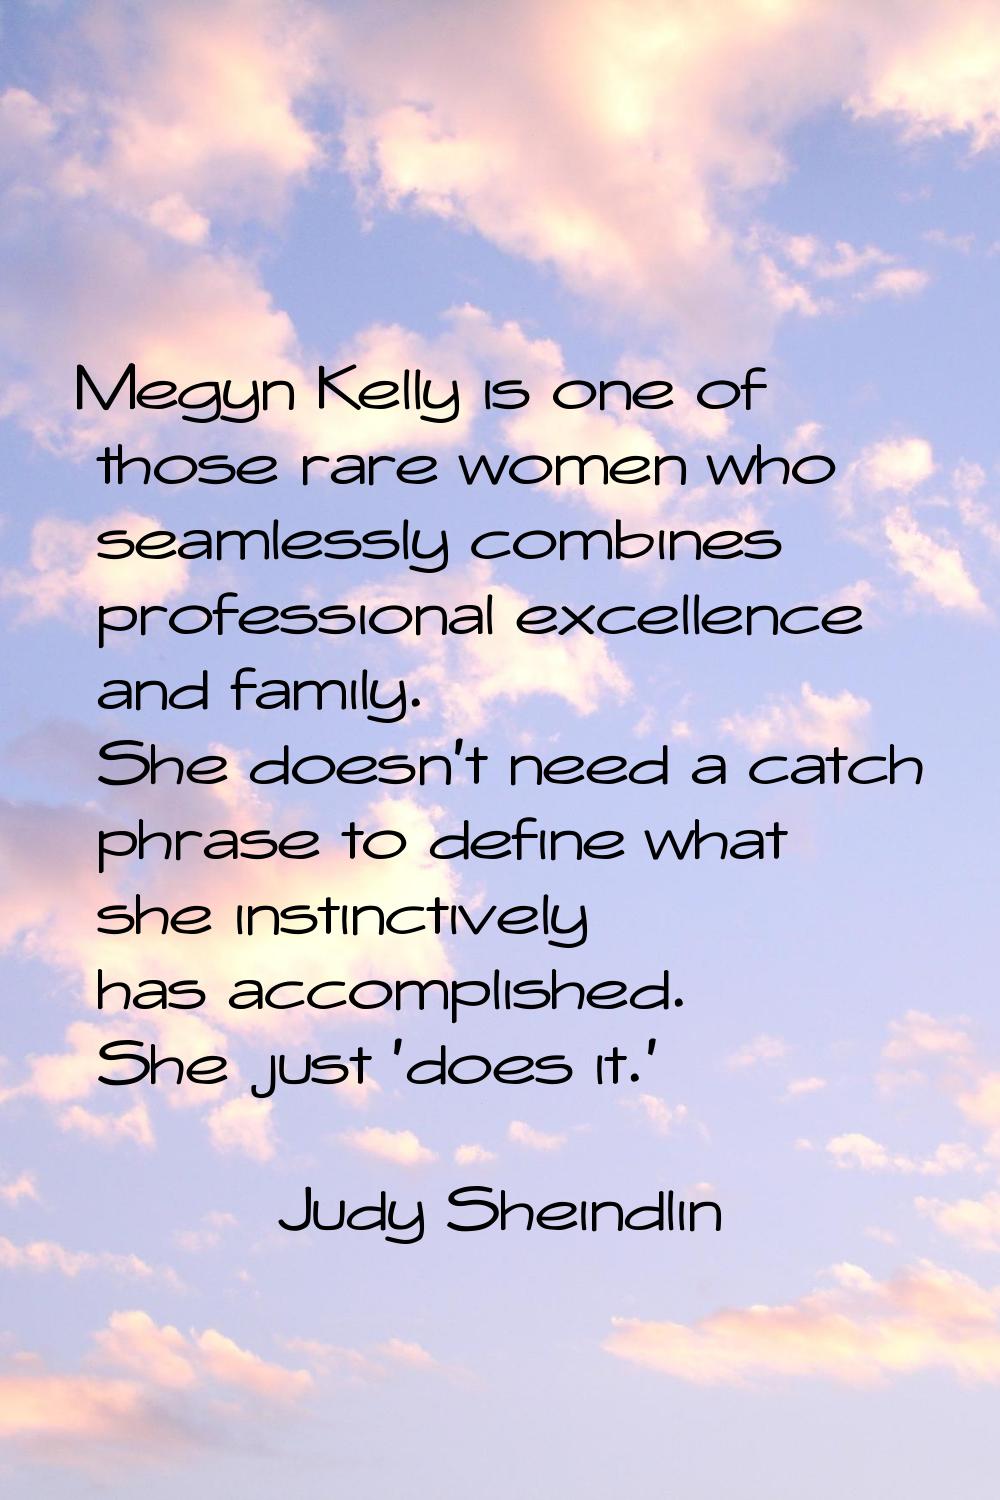 Megyn Kelly is one of those rare women who seamlessly combines professional excellence and family. 